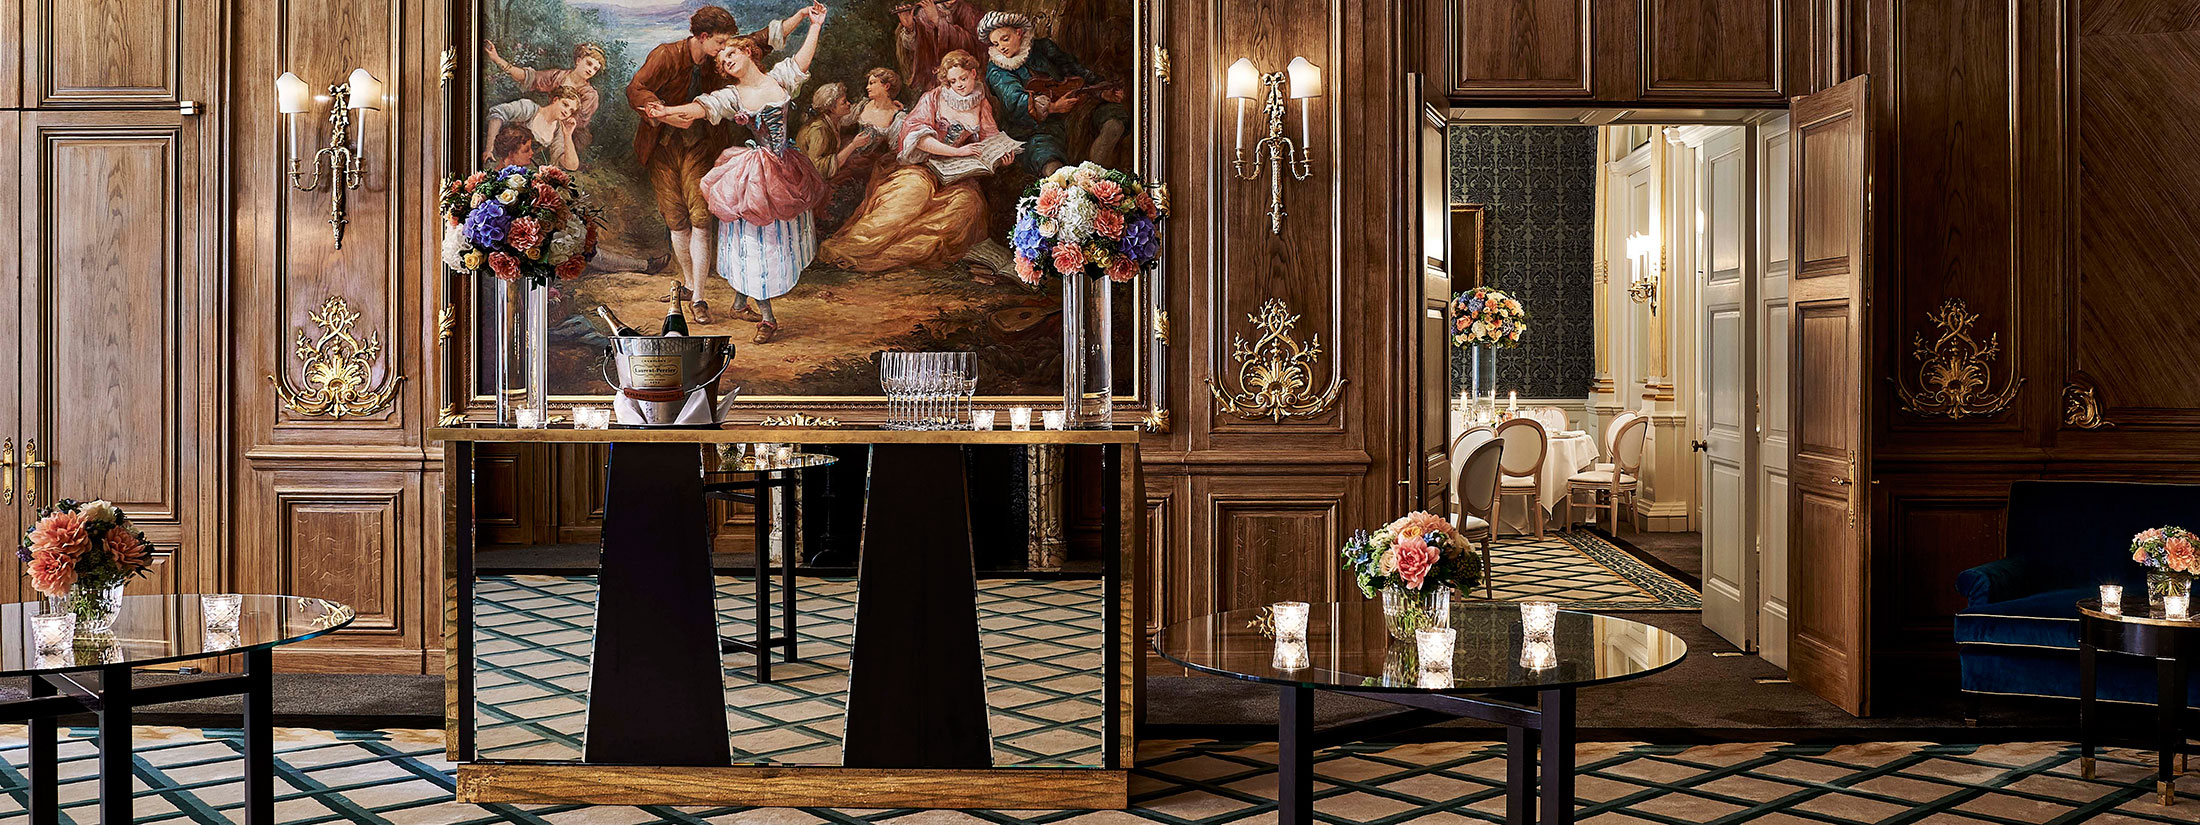 Bar setting in warmer tones, in front of a mural of a dancing couple, in the French Salon.